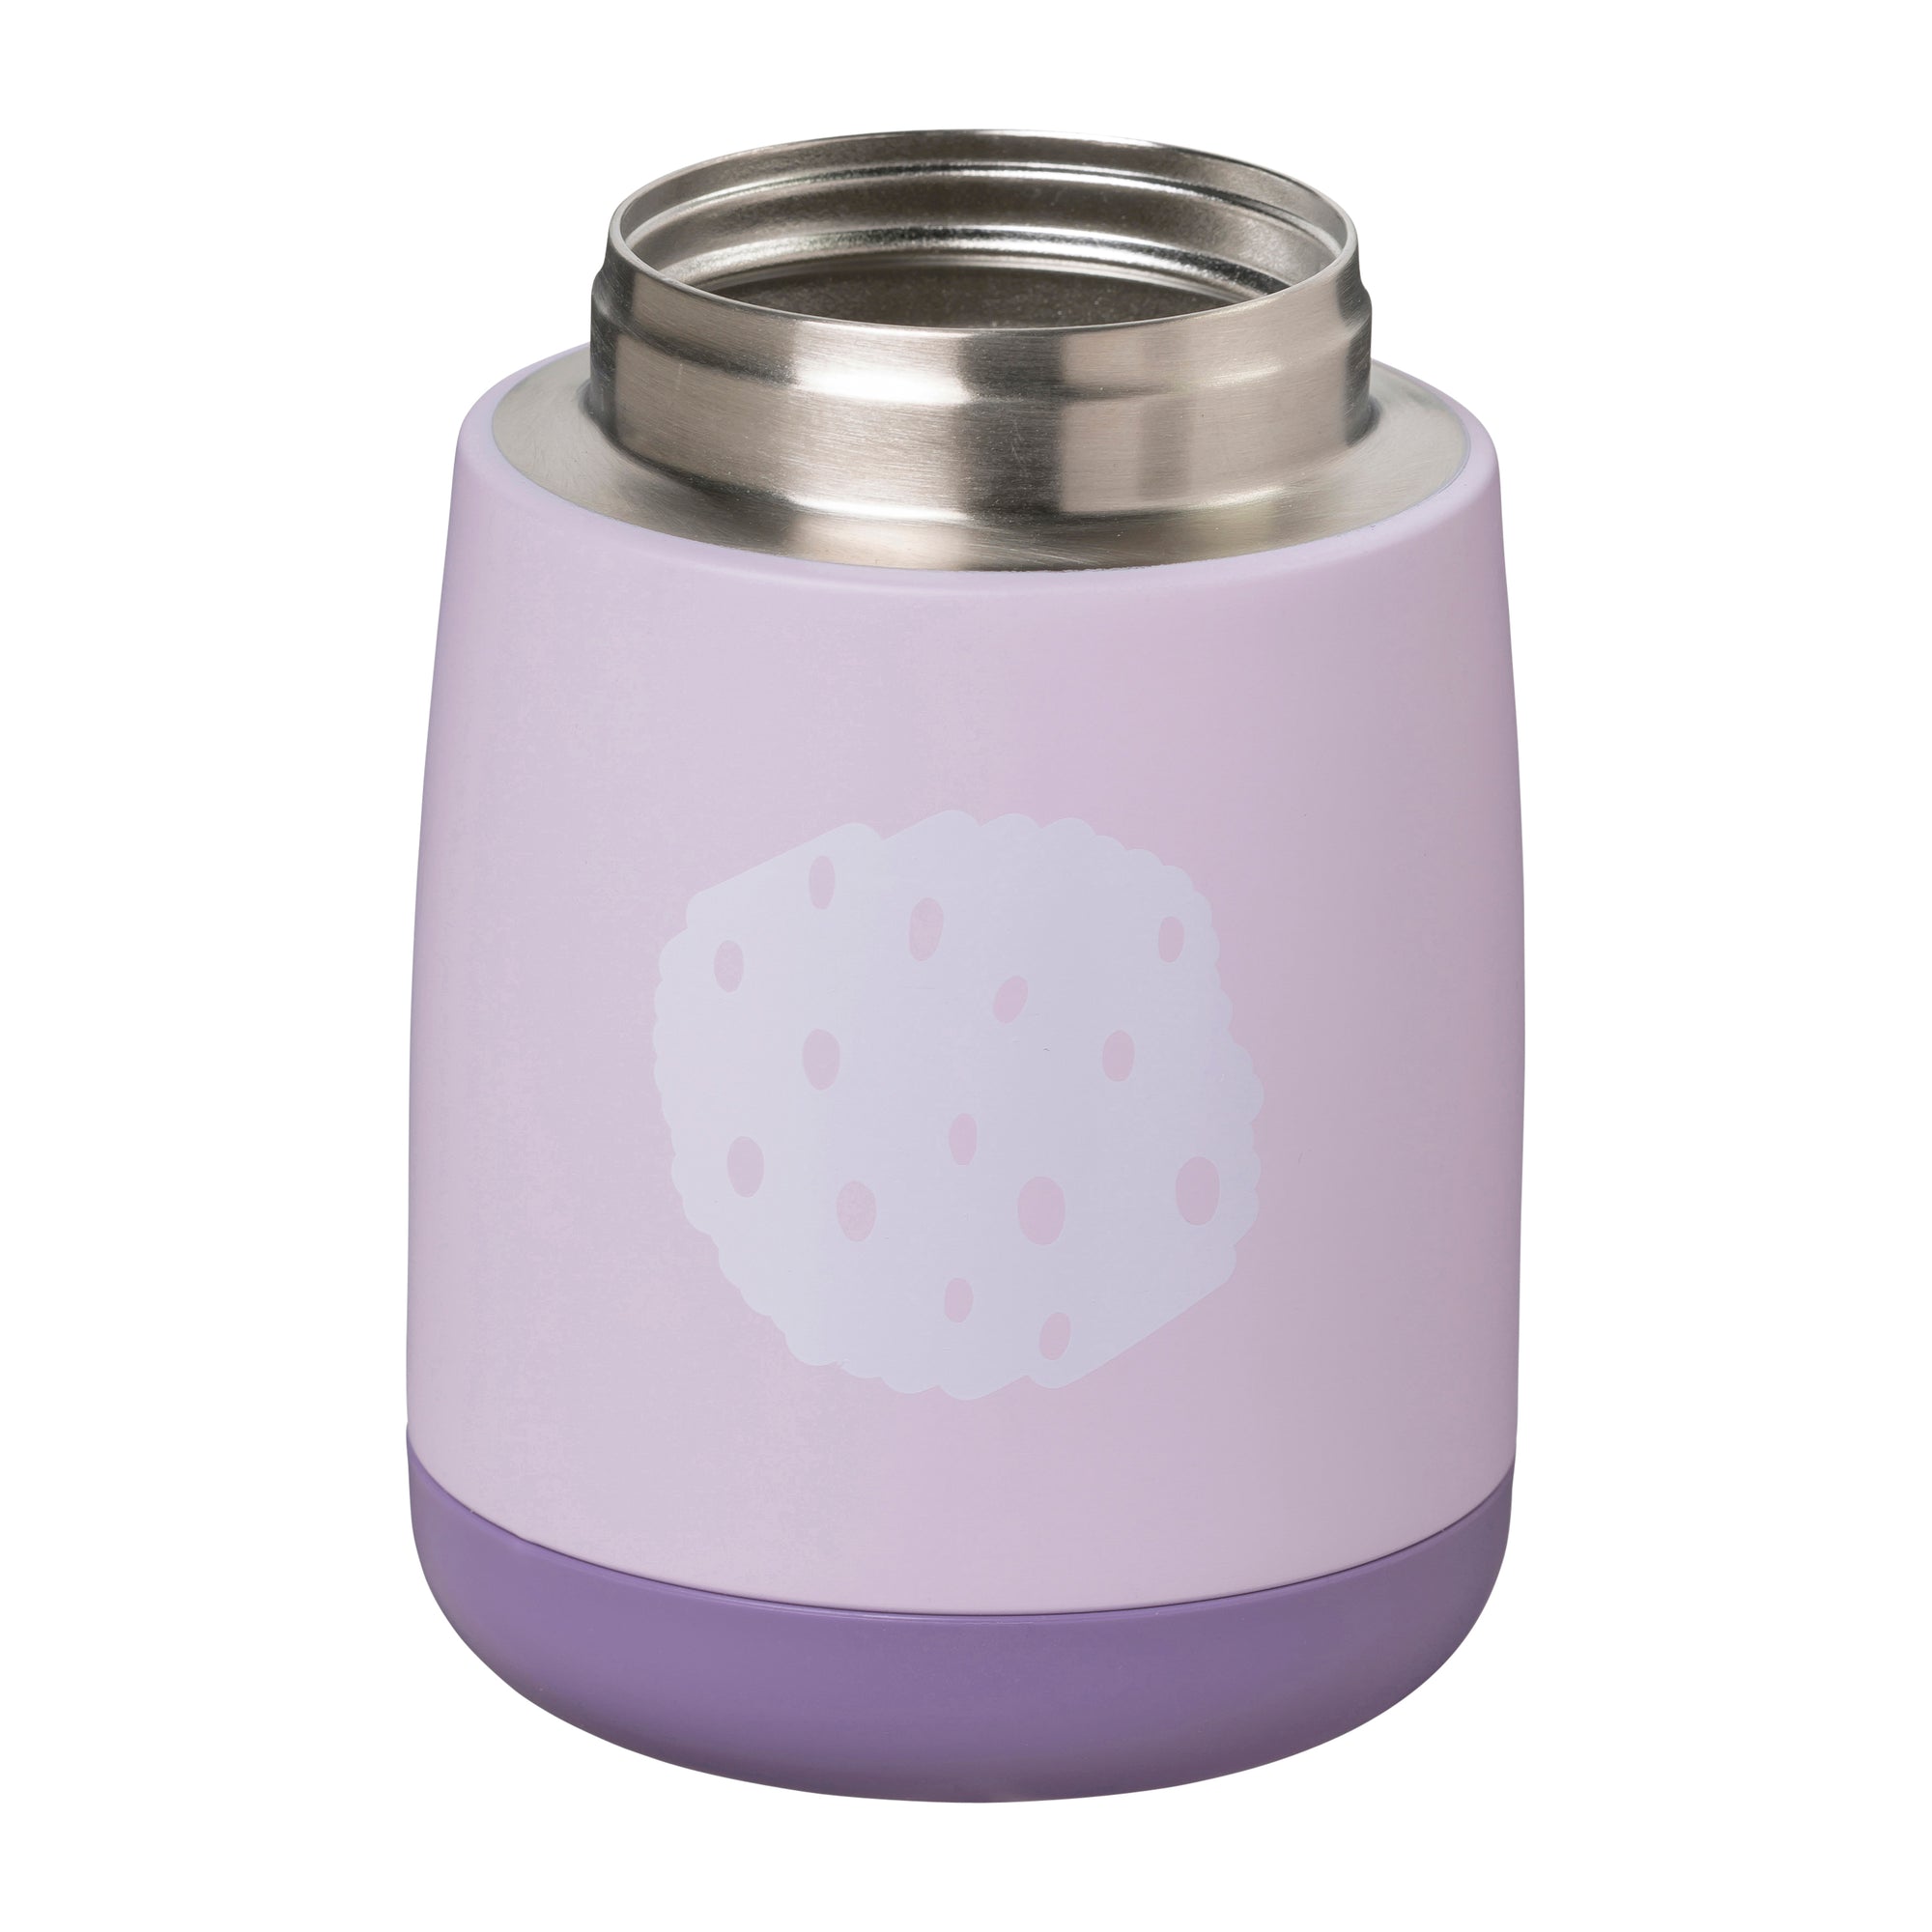 bear hugs b.box mini insulated food jar for kids lunches - Mikki and Me Kids